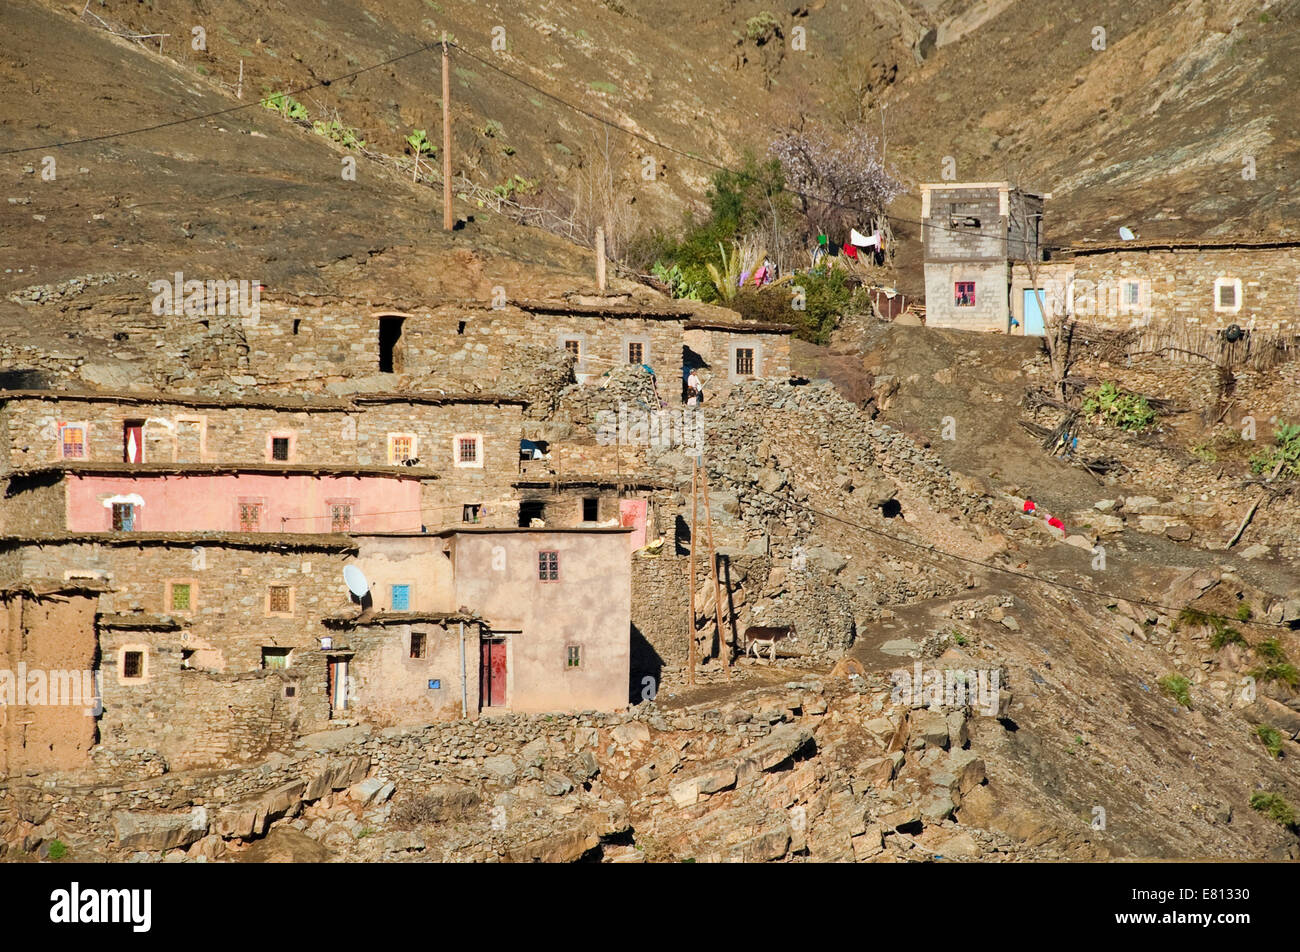 Horizontal view of a small mudbrick village nestled in the High Atlas Mountain range in Morocco. Stock Photo